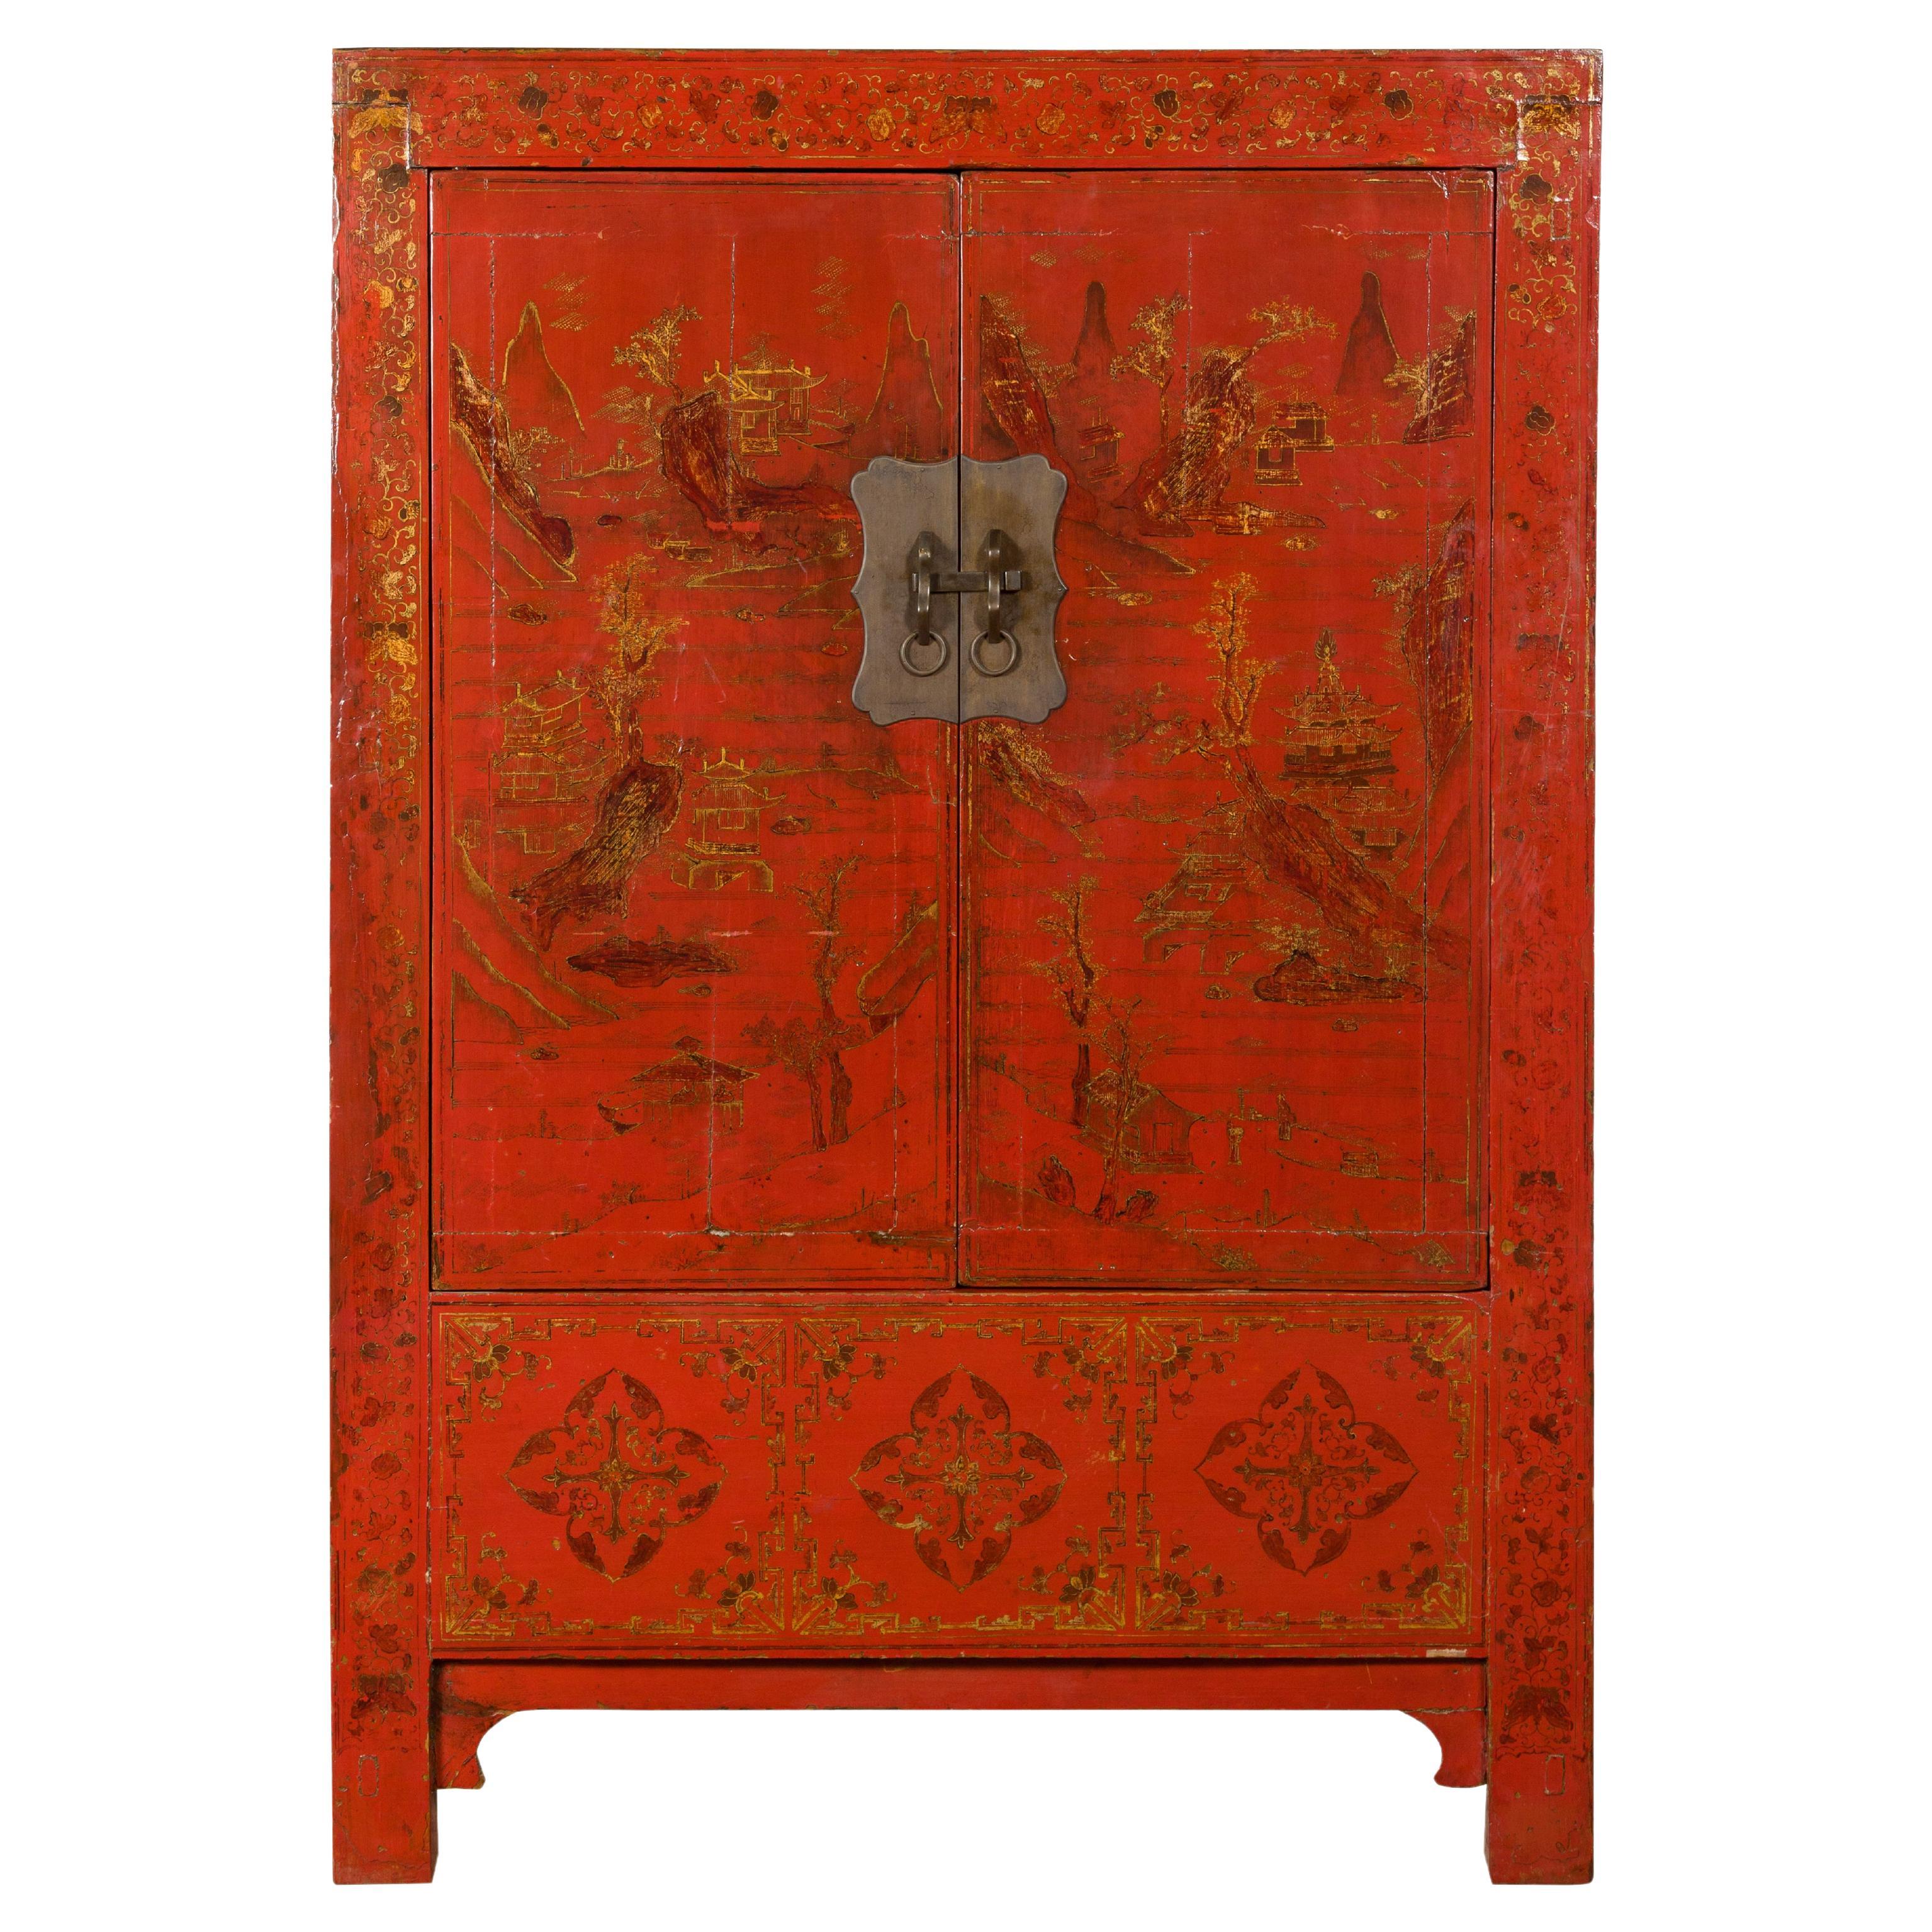 Qing Dynasty Red Lacquer 19th Century Cabinet with Gilded Hand-Painted Décor For Sale